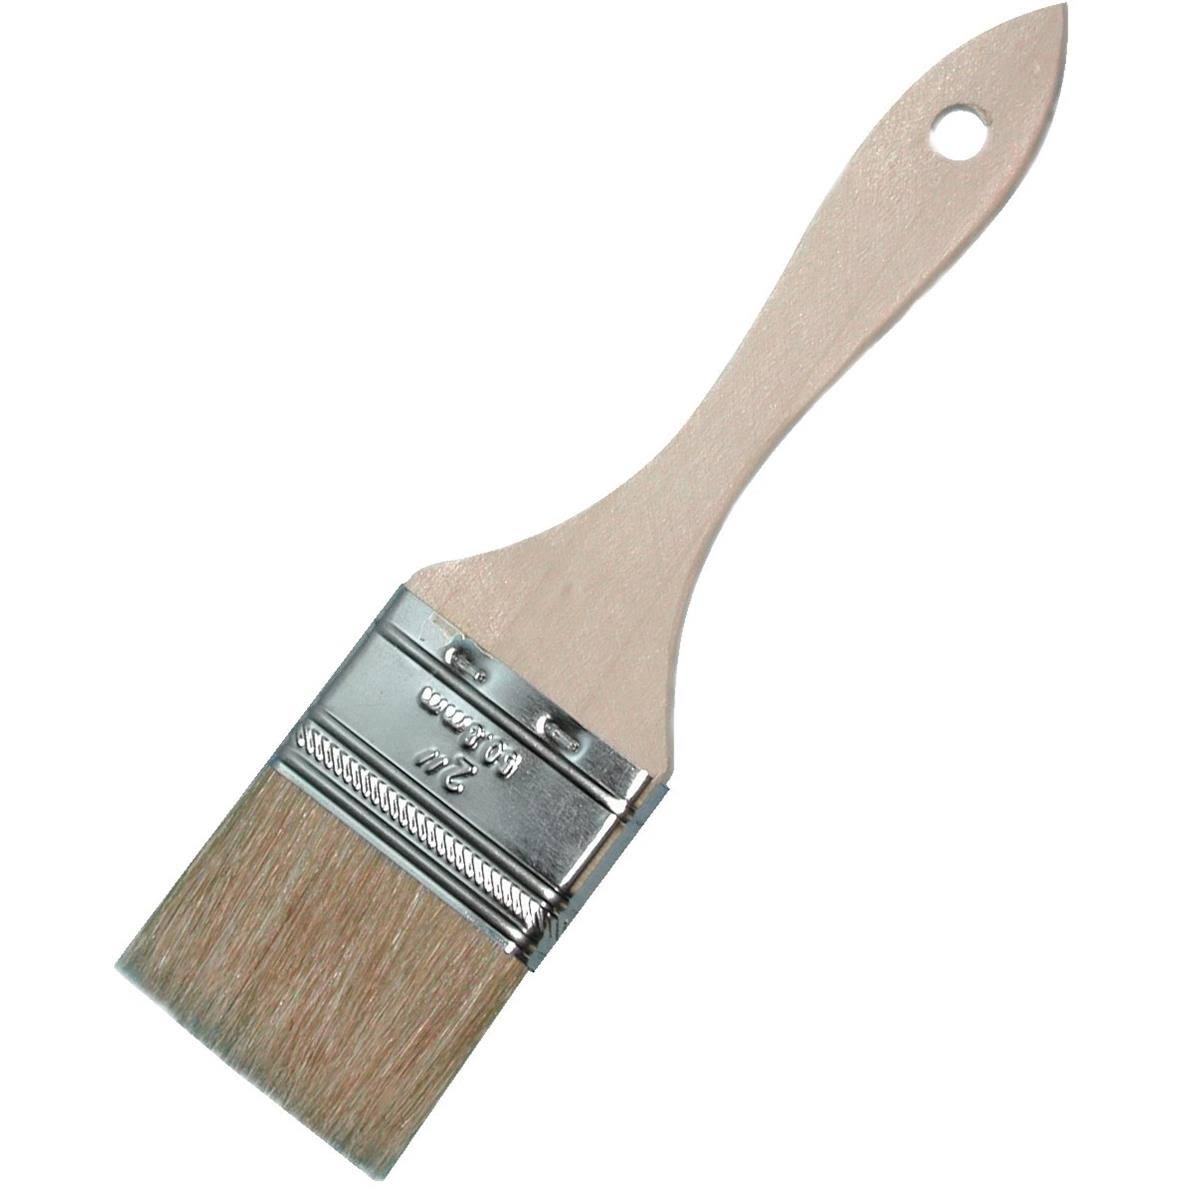 Magnolia Brush 235-DT Double Thickness Paint Brushes - Case of 12